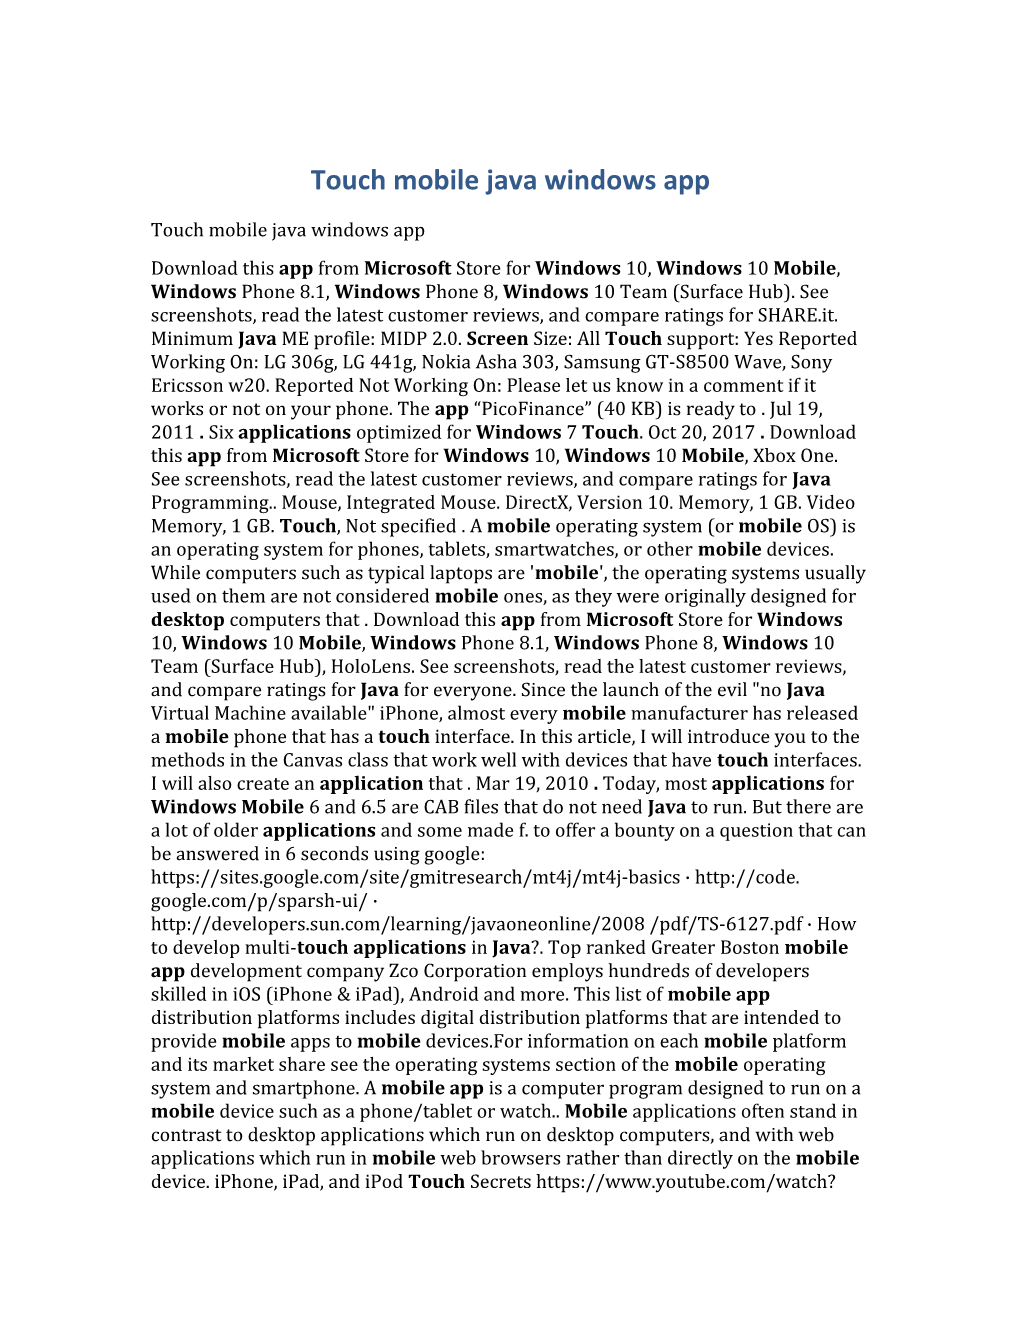 Touch Mobile Java Windows App